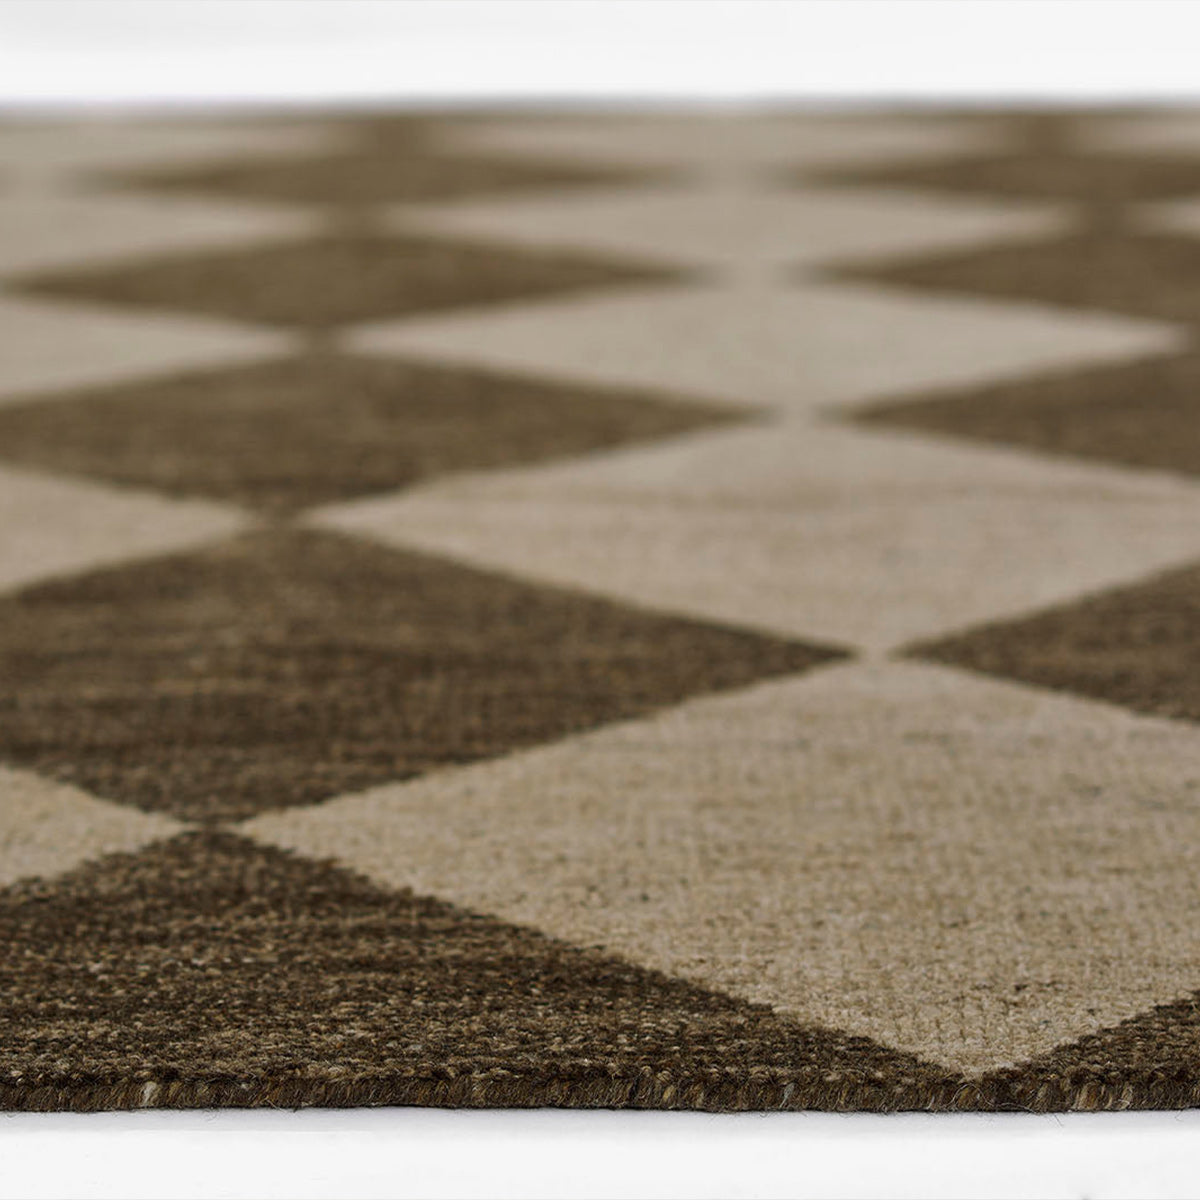 Willow-4 Brown Rug